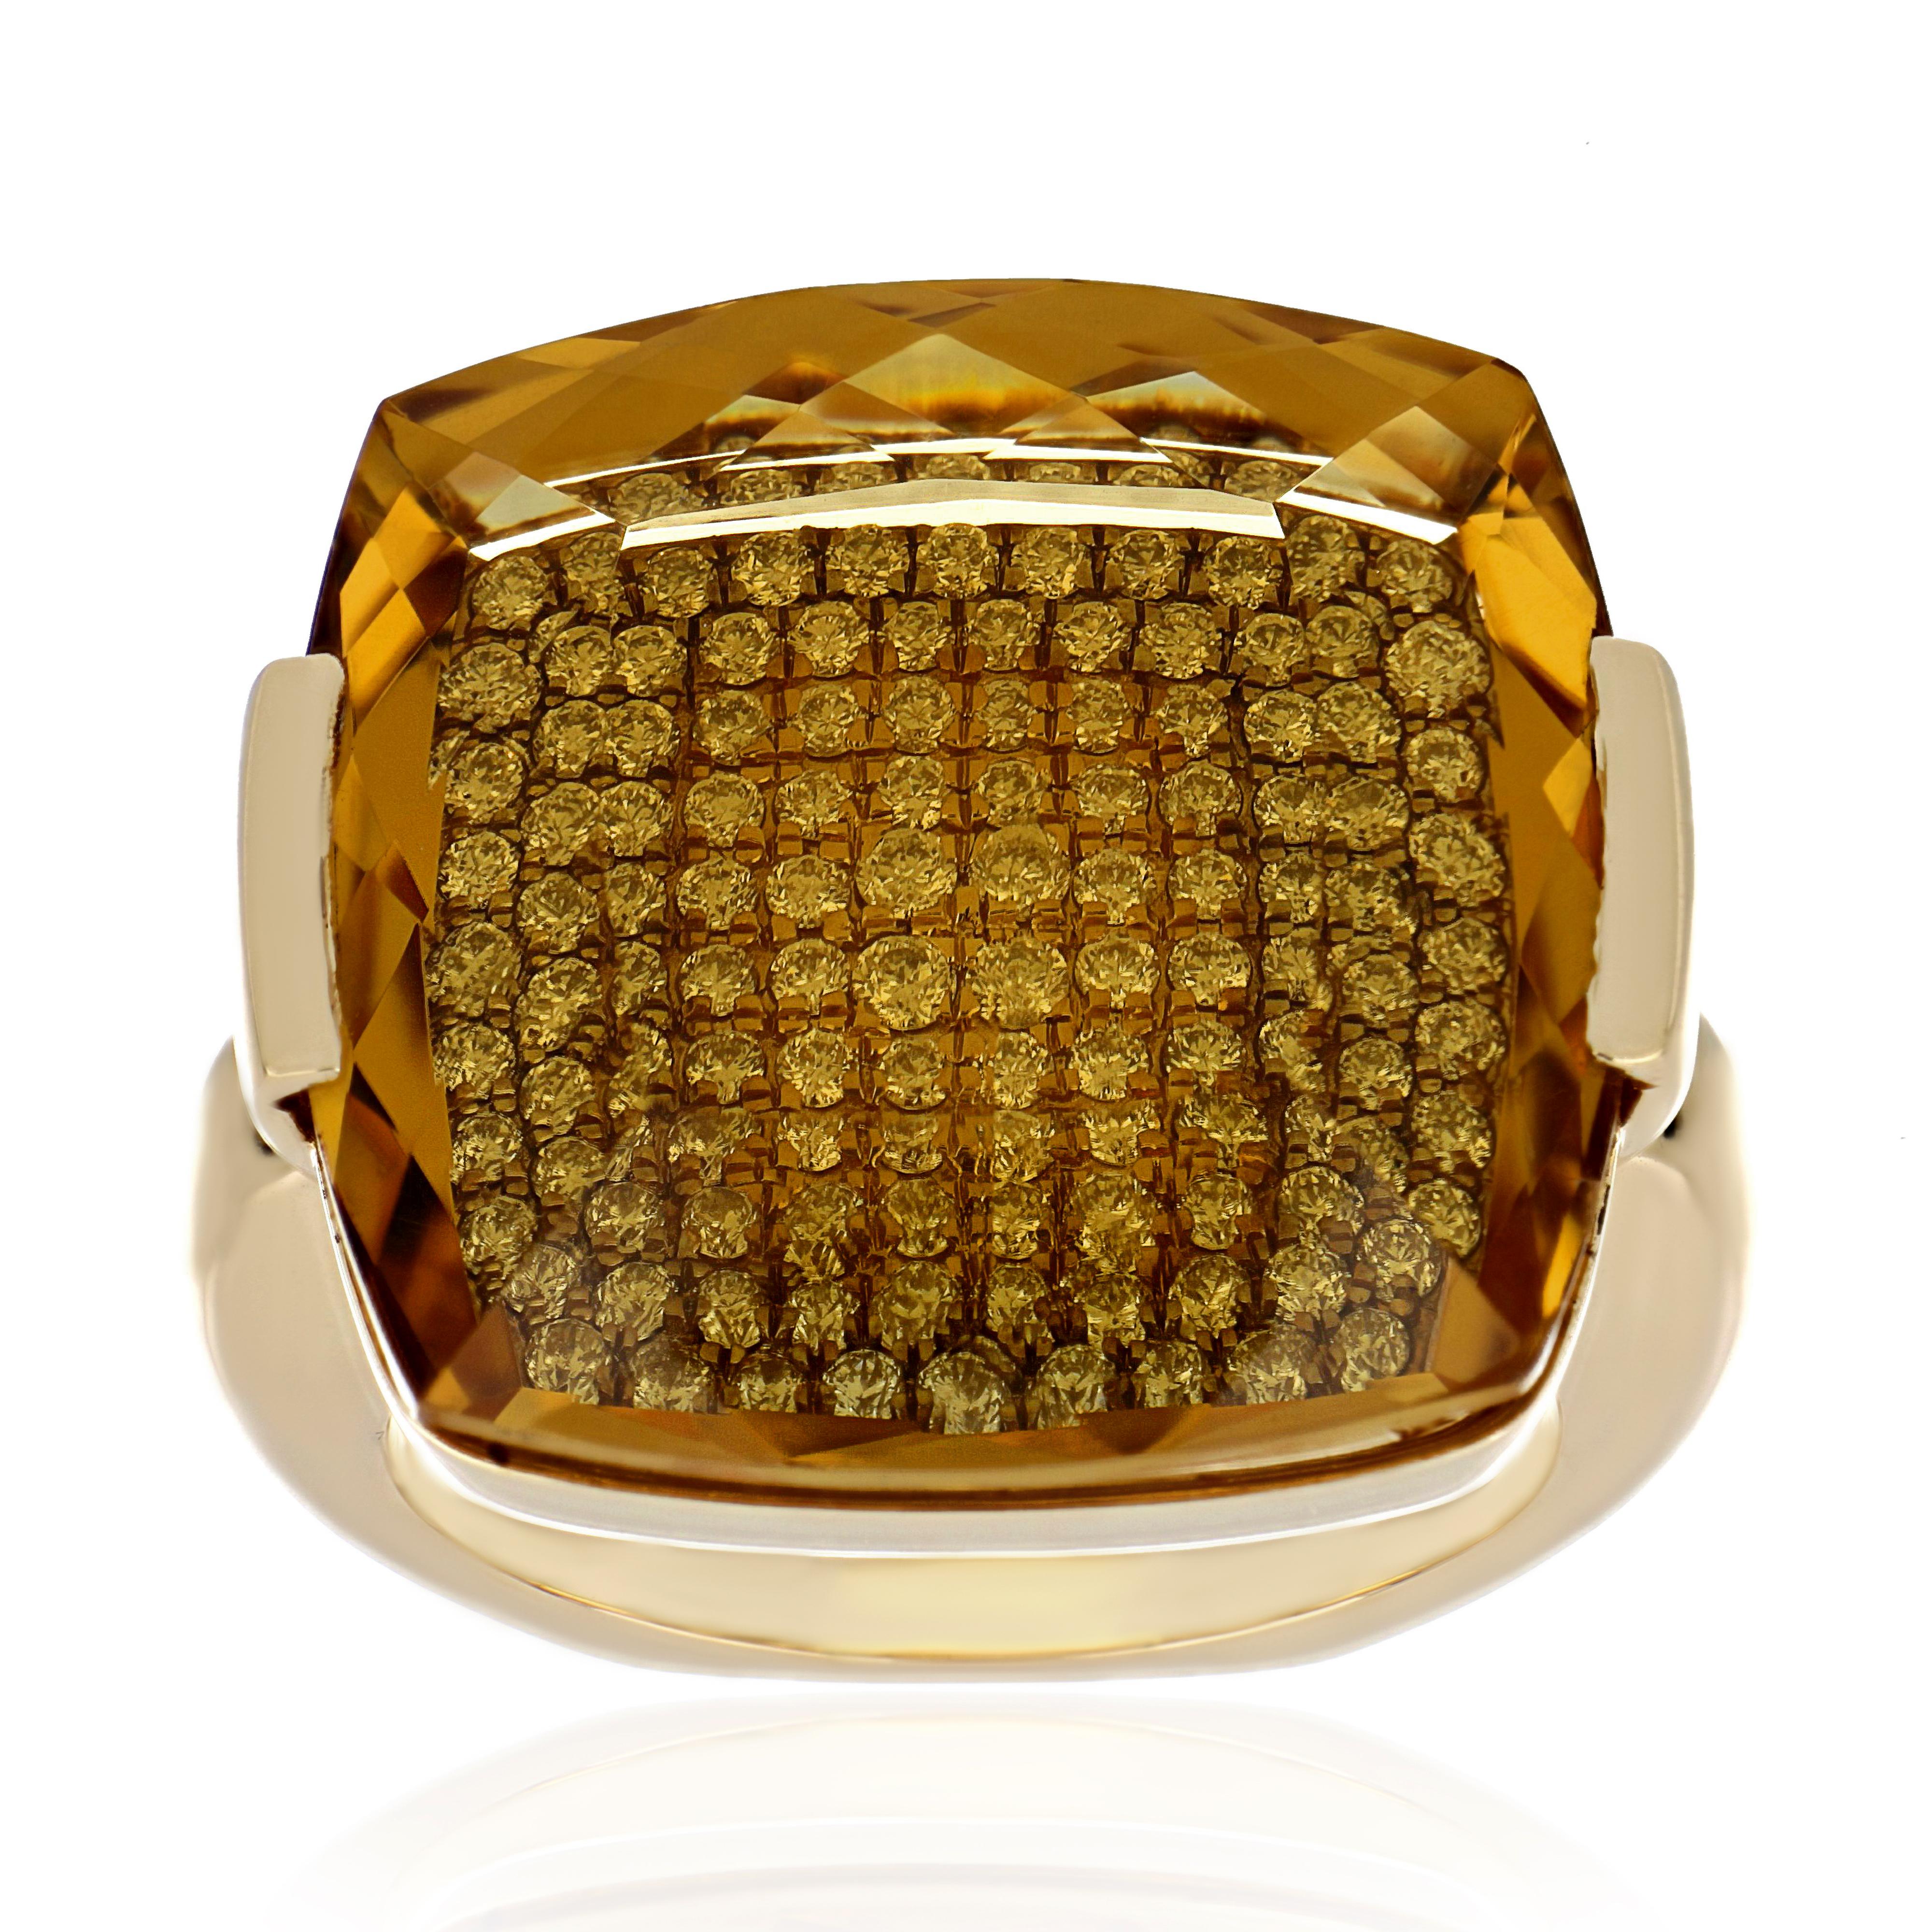 14 Karat Yellow Gold ring studded with Cushion Cut  22.98 Ct  Honey Quartz,  with unique under stone setting of  0.74 Cts Diamond Beautifully hand crafted in 14 Karat Yellow Gold.

Stone Details:
Honey Quartz: 20 x 20 mm

Stone Weights:
Honey